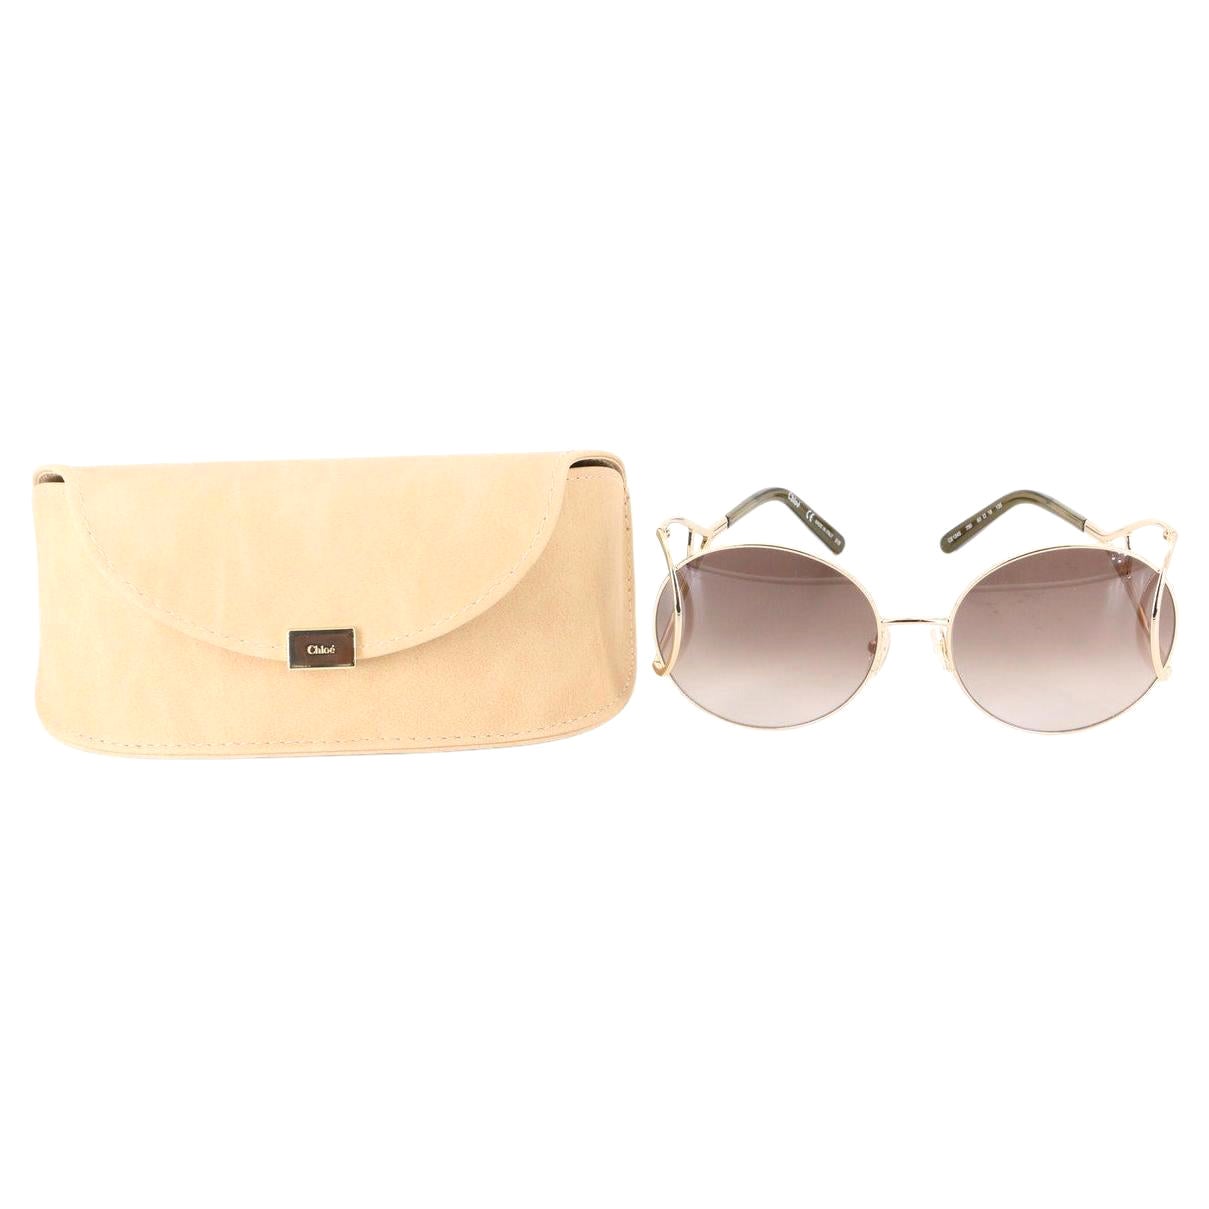 New Chloe Gold Sunglasses With Case & Box